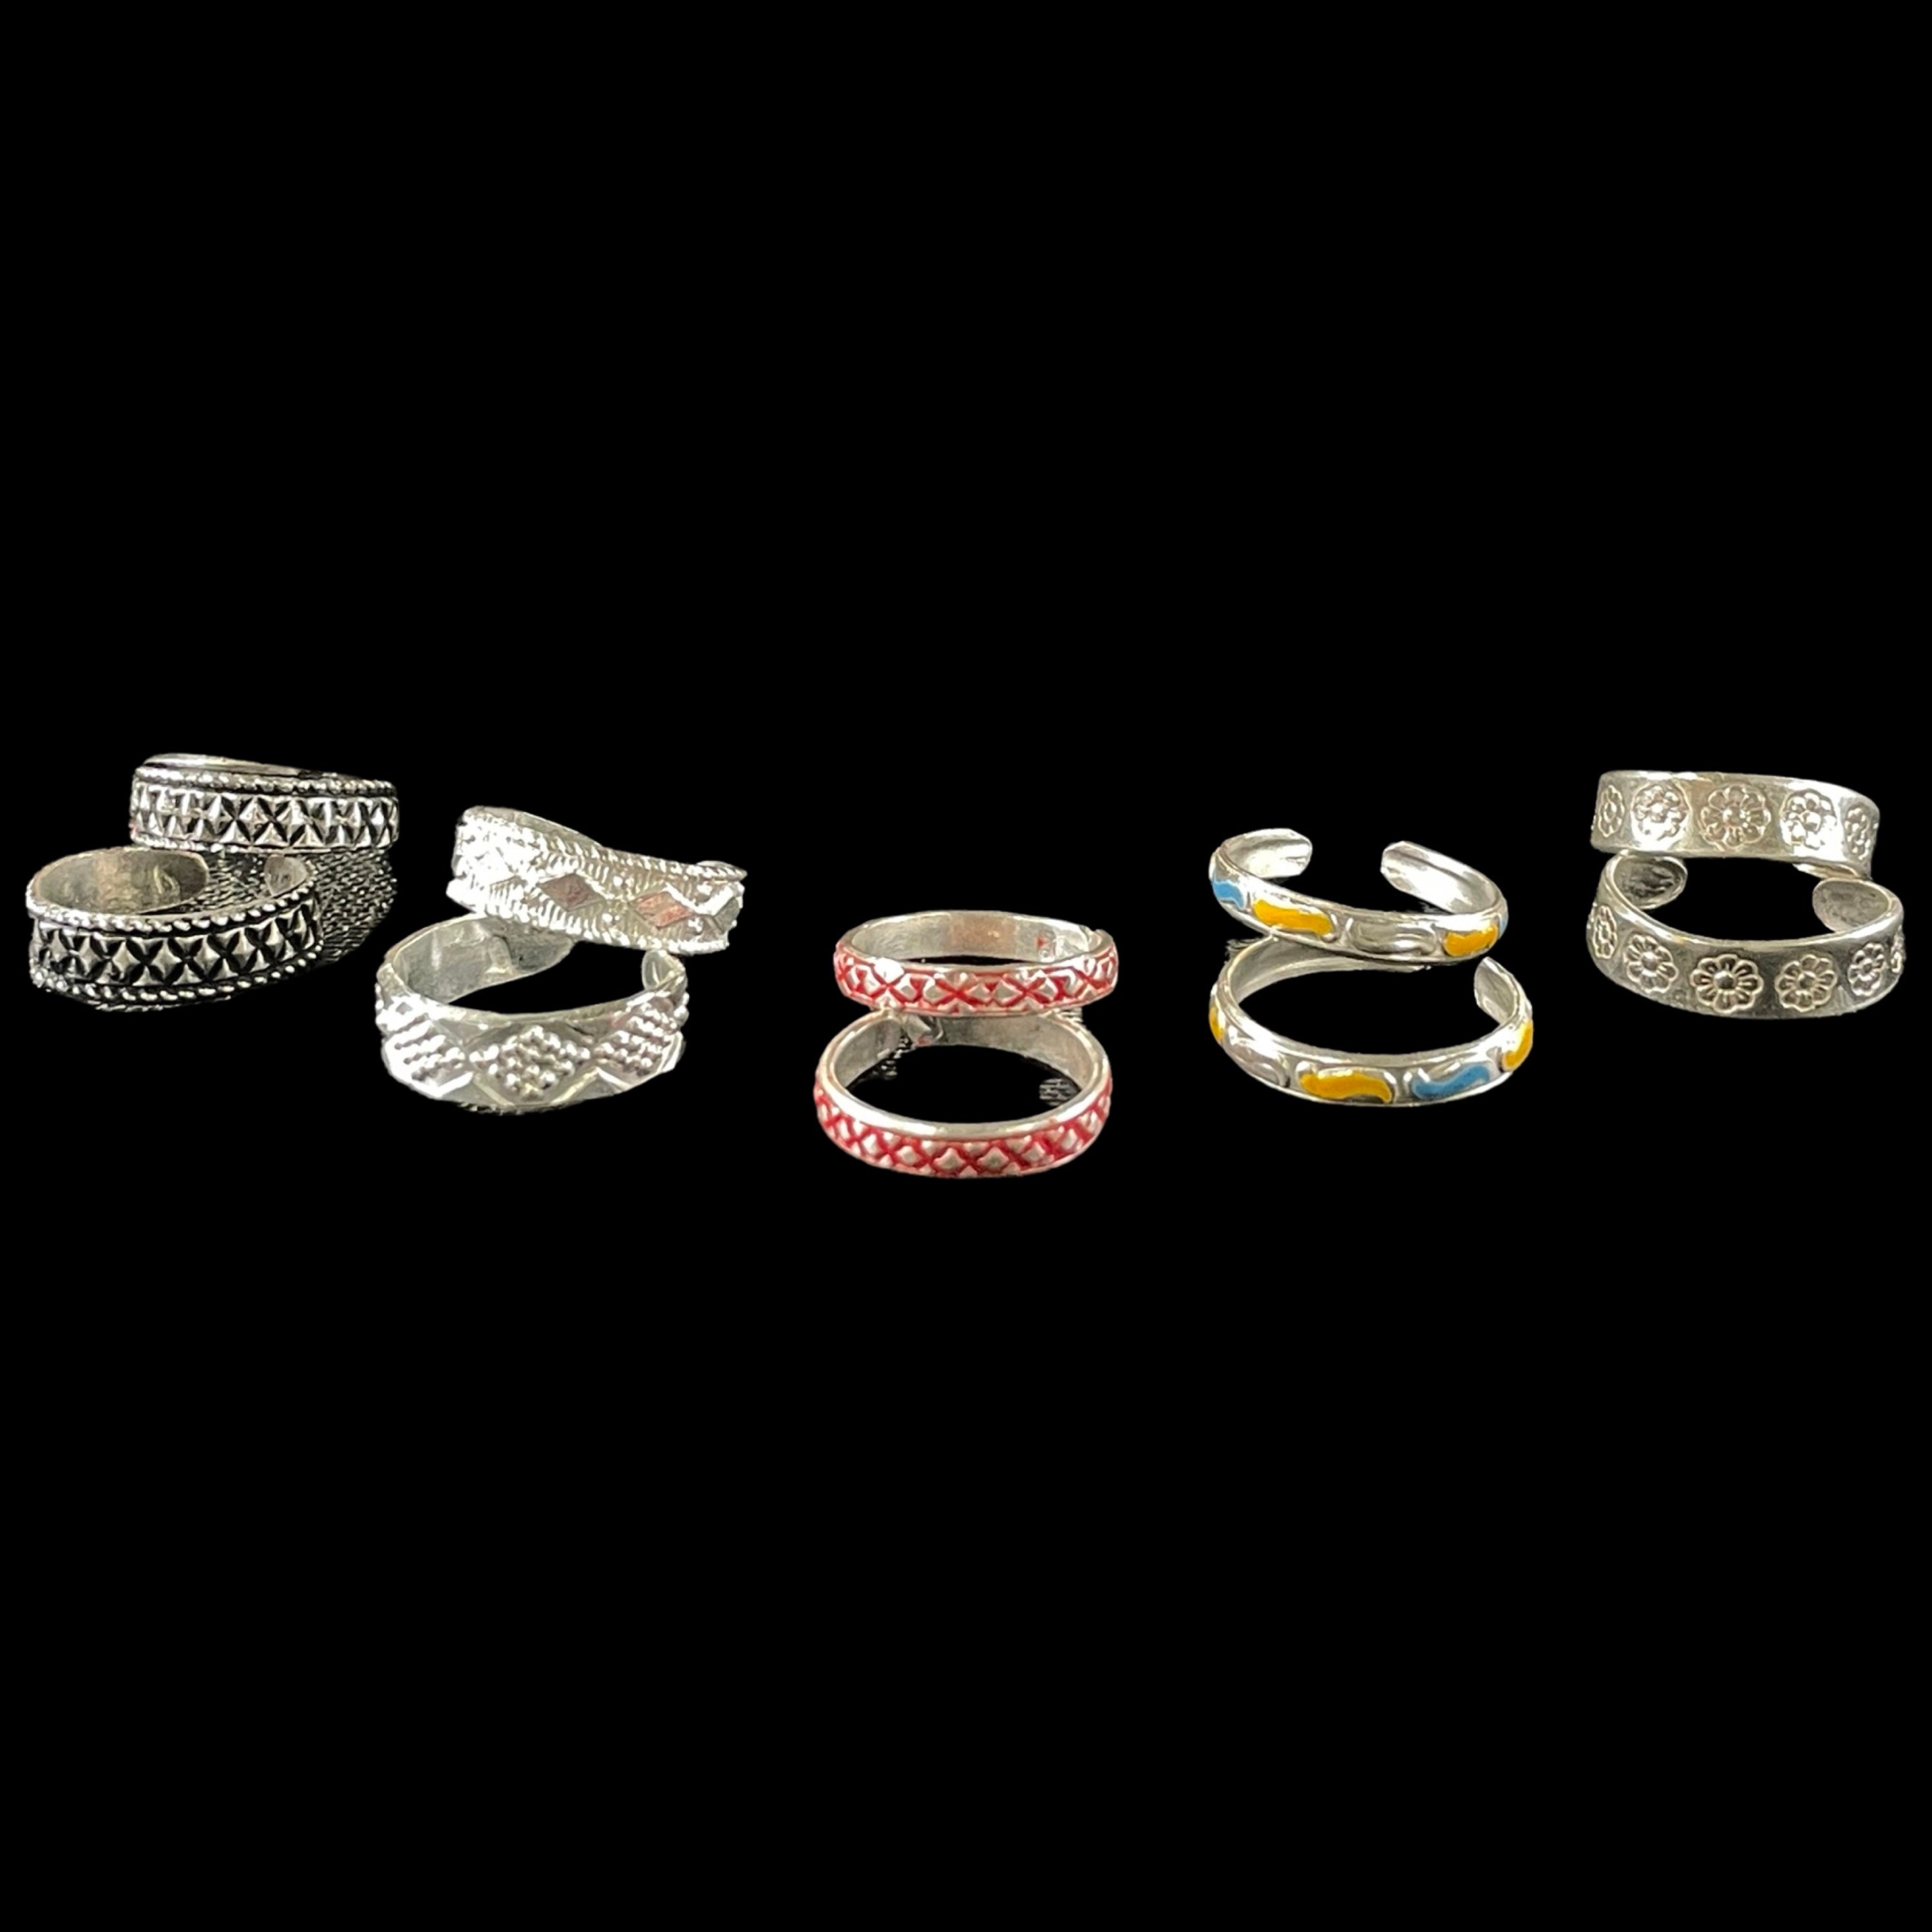 925 Sterling Silver Toe-rings (Pack of 5 Pairs)- Set #16